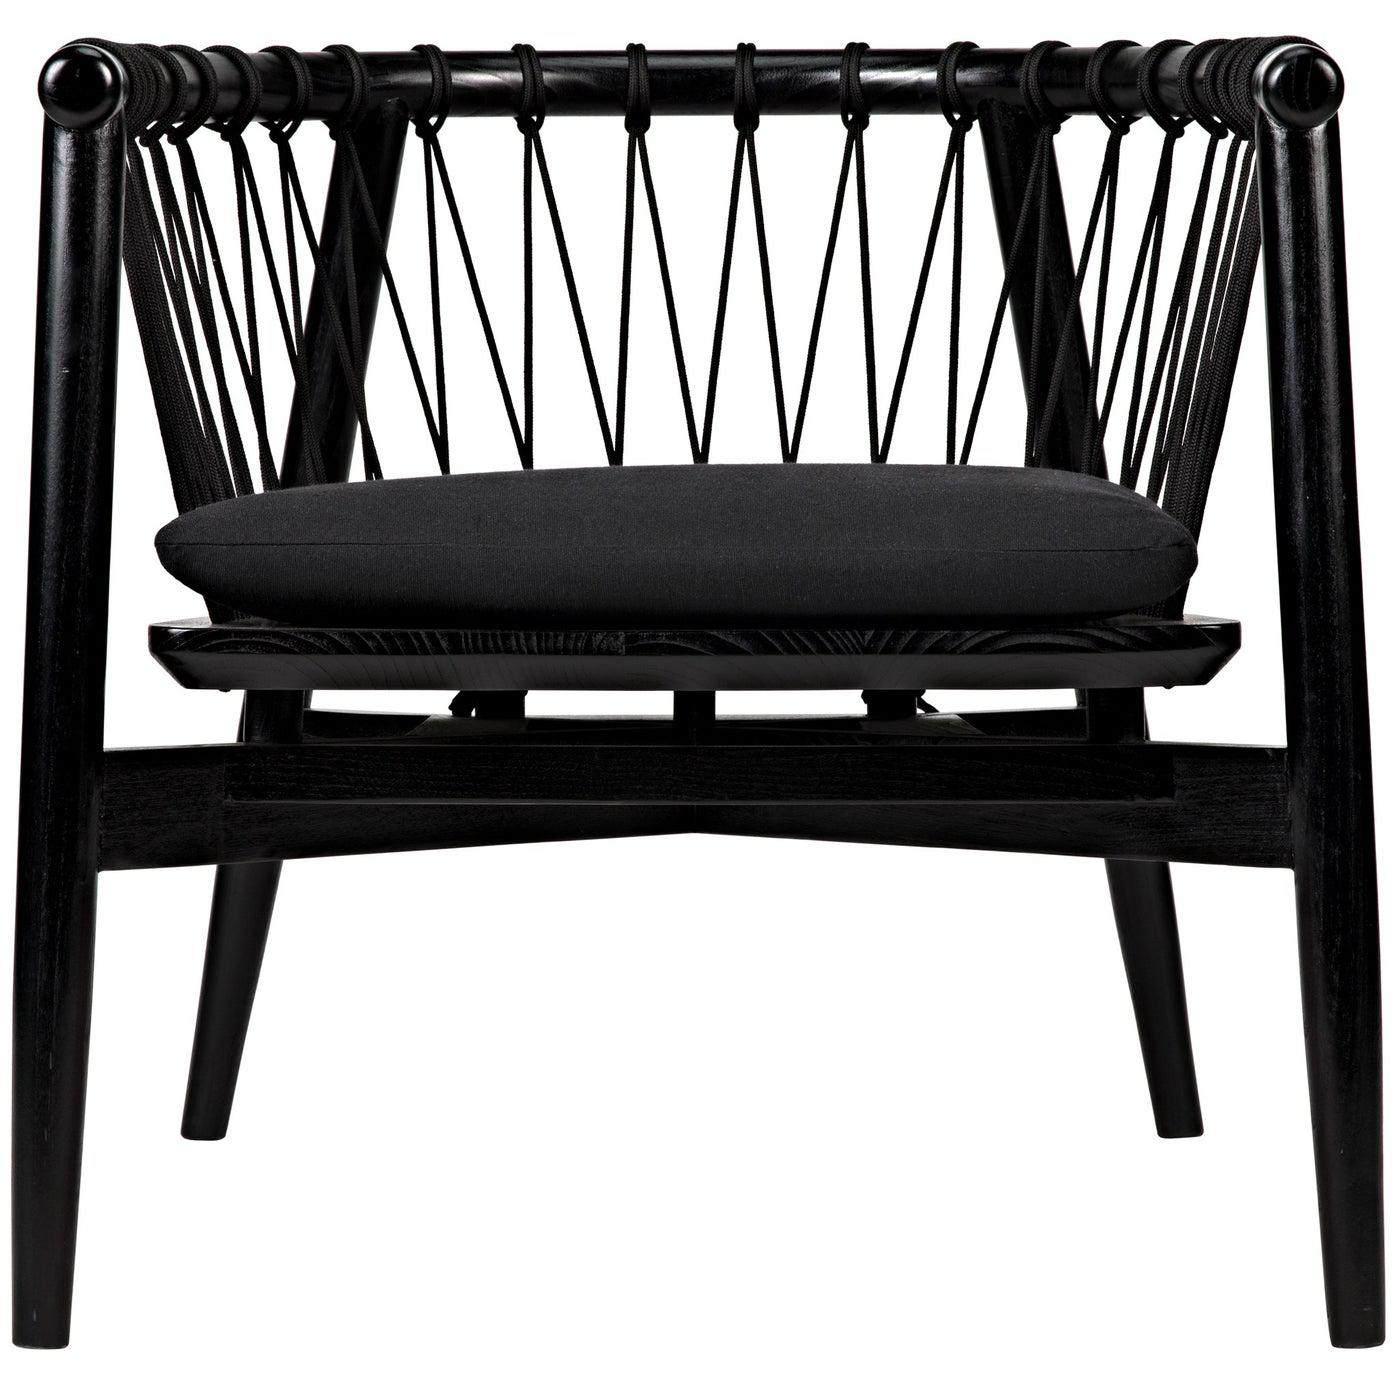 Hector Chair, Charcoal Black